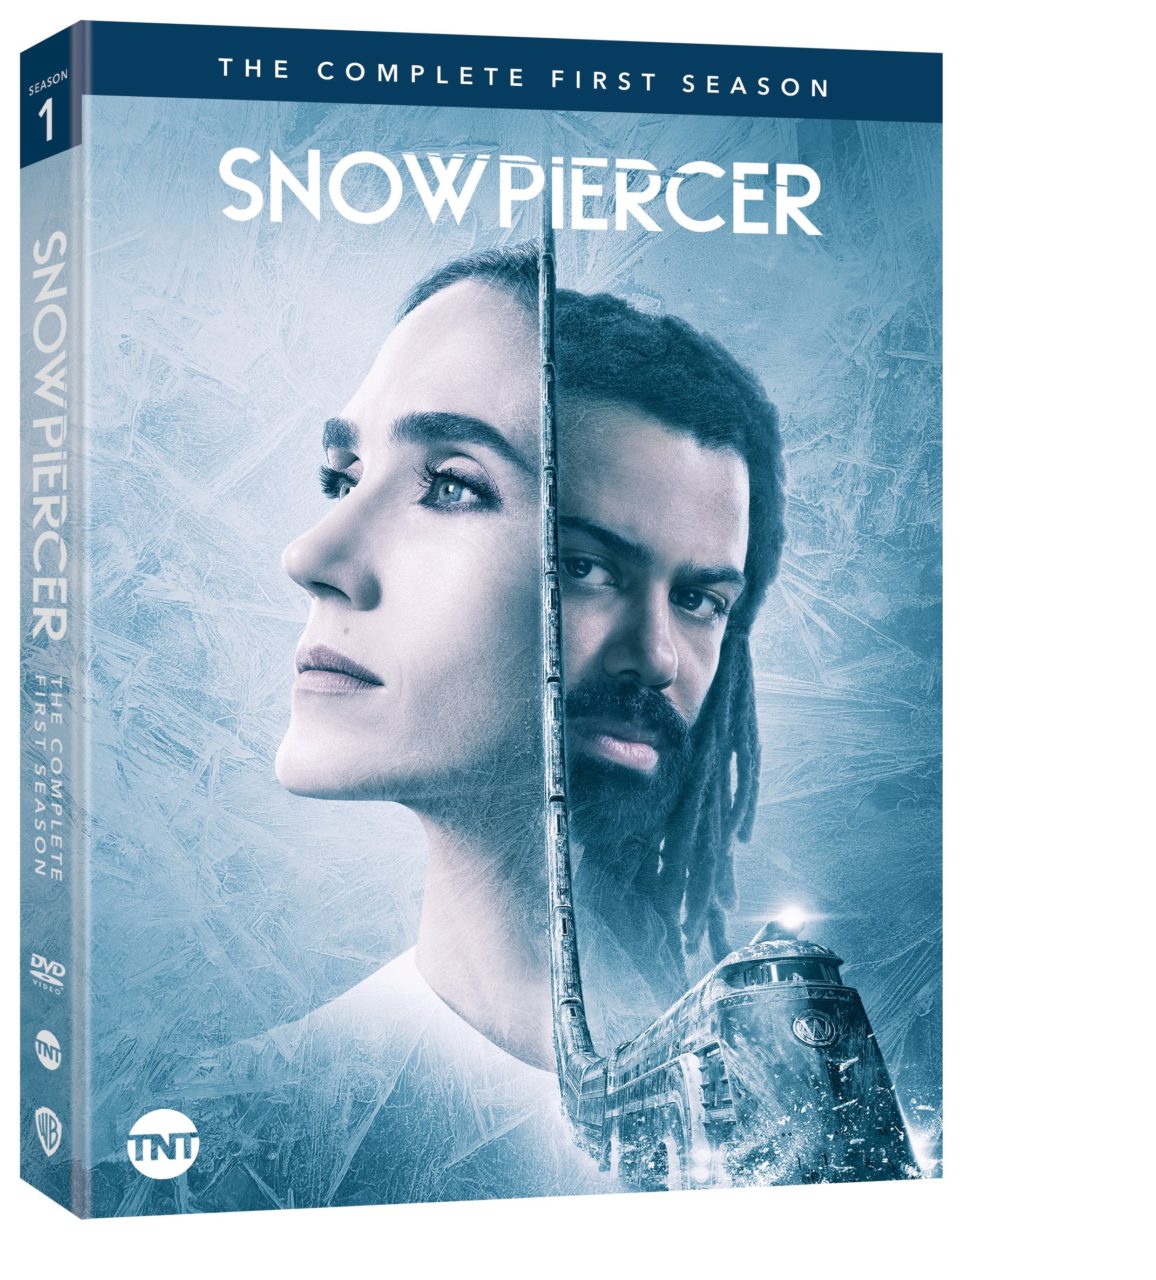 Snowpiercer: The Complete First Season DVD cover (Warner Bros. Home Entertainment)